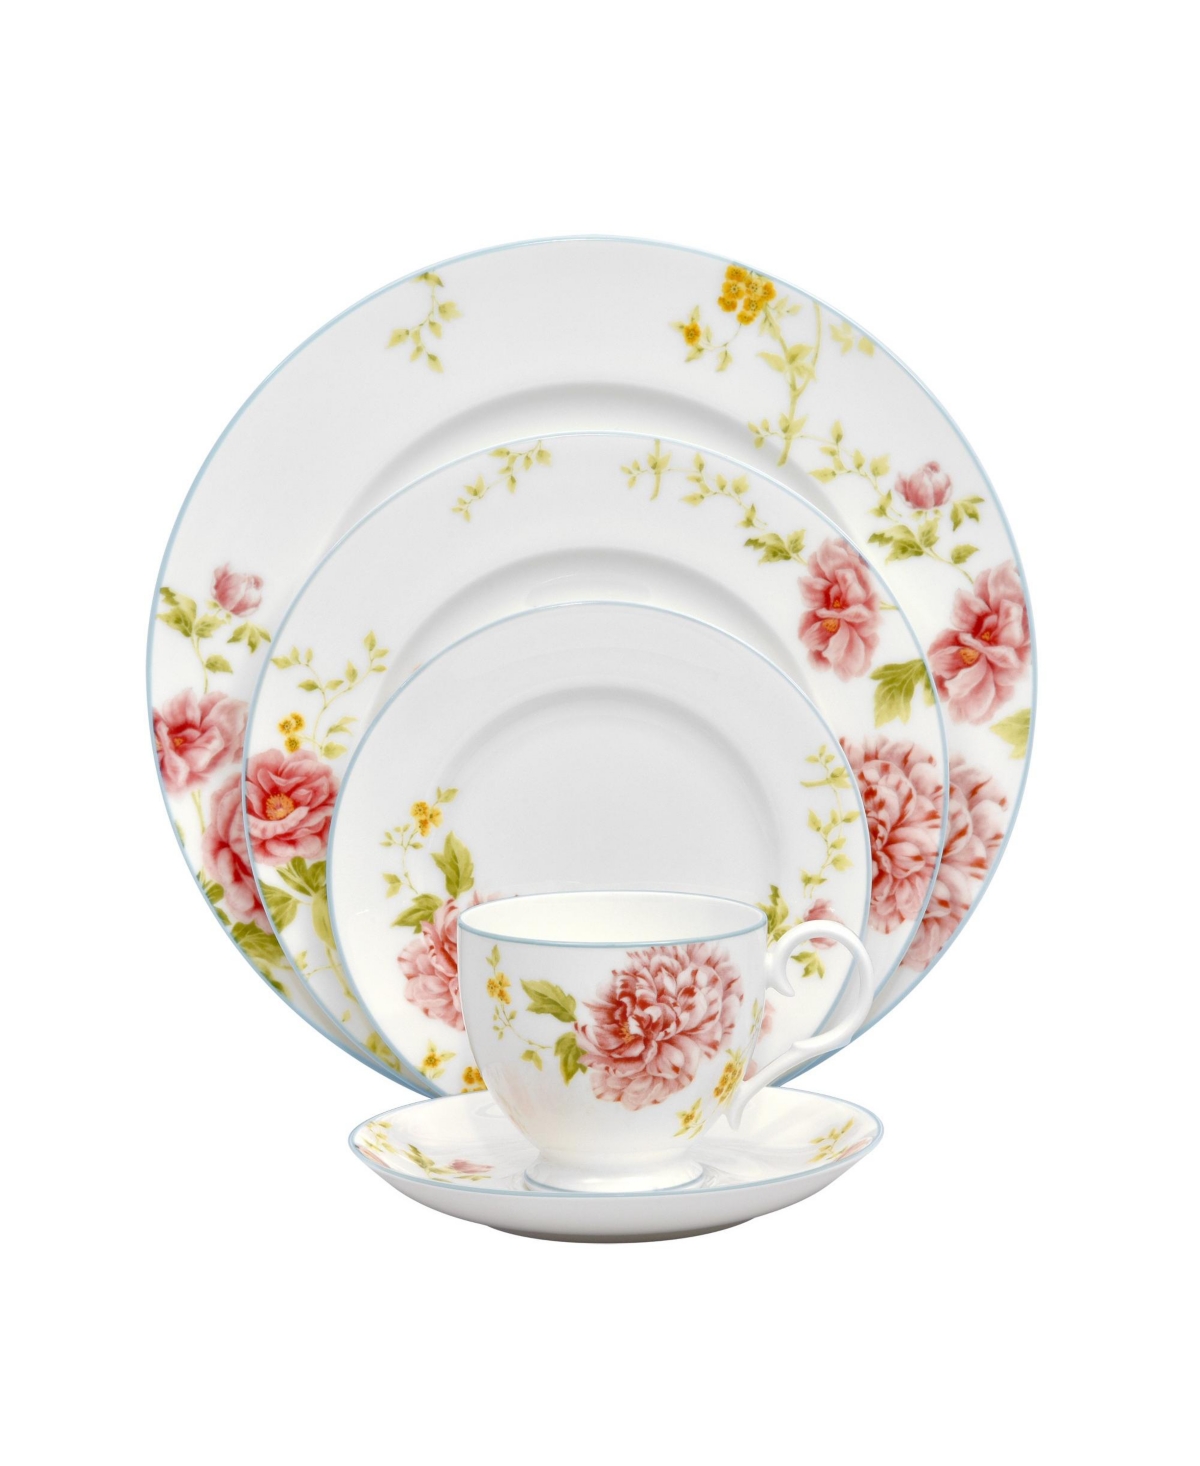 Peony Pageant 5 Piece Place Setting - White/pink